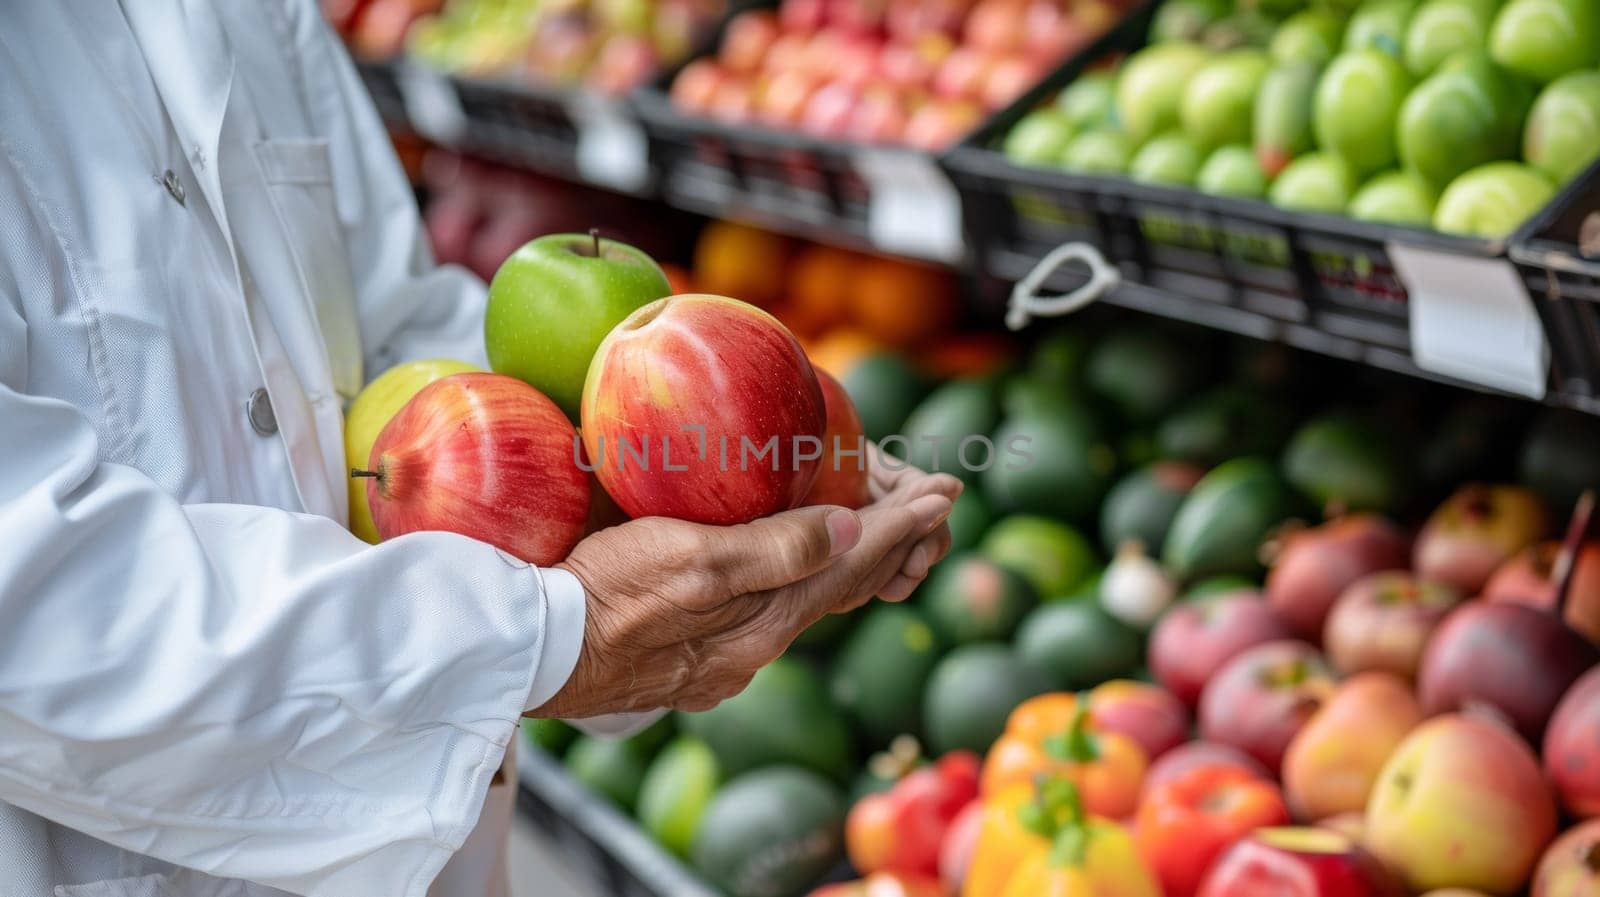 A person holding a basket of apples in front of produce